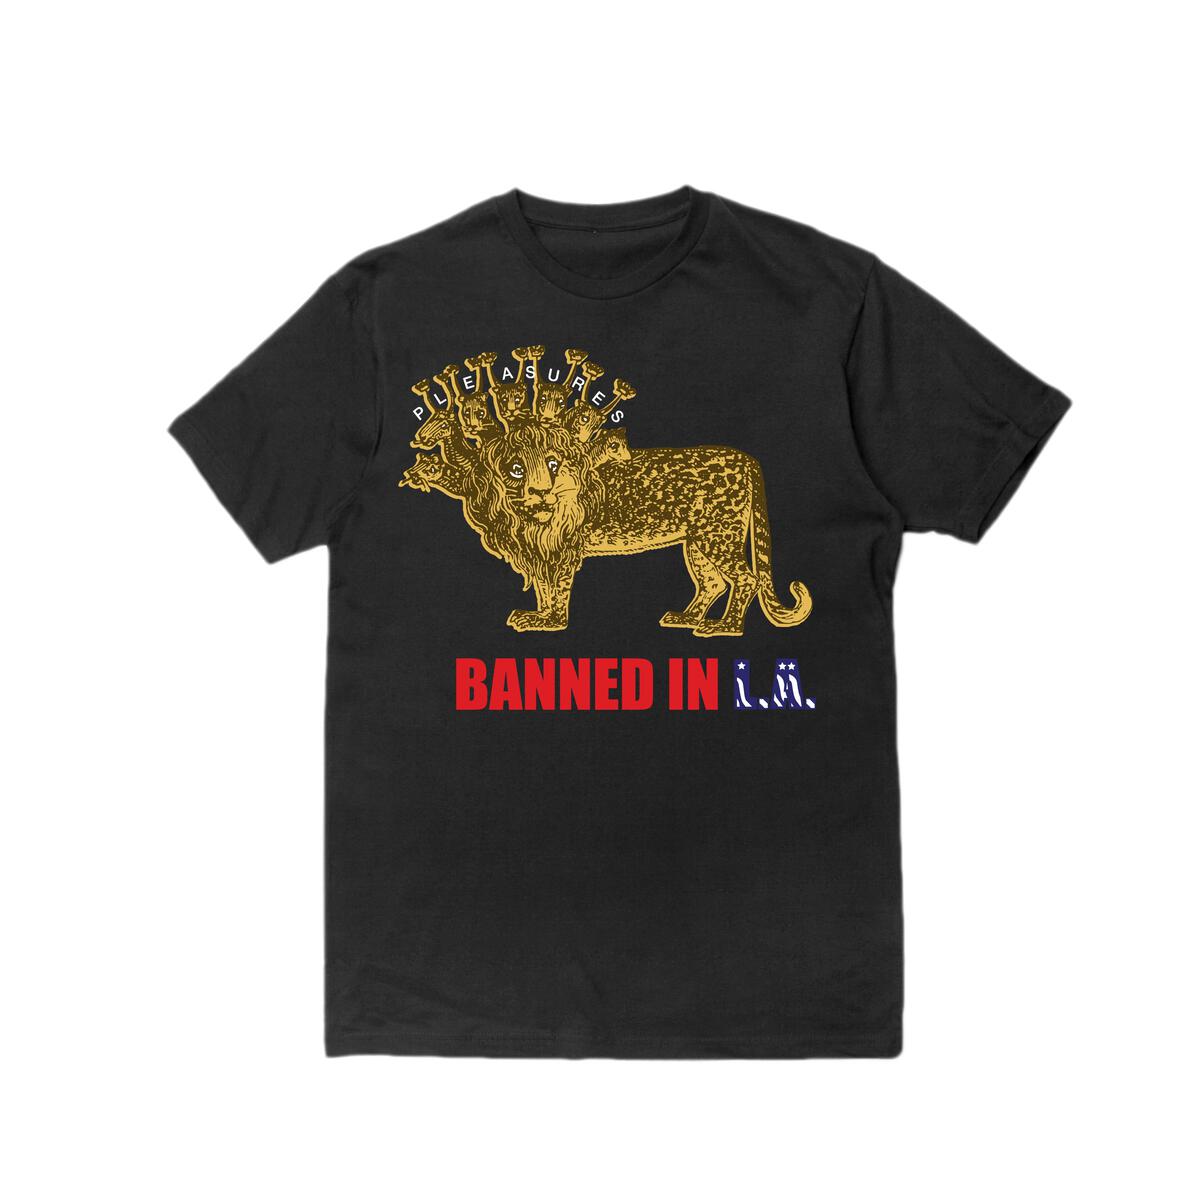 BANNED T-SHIRT